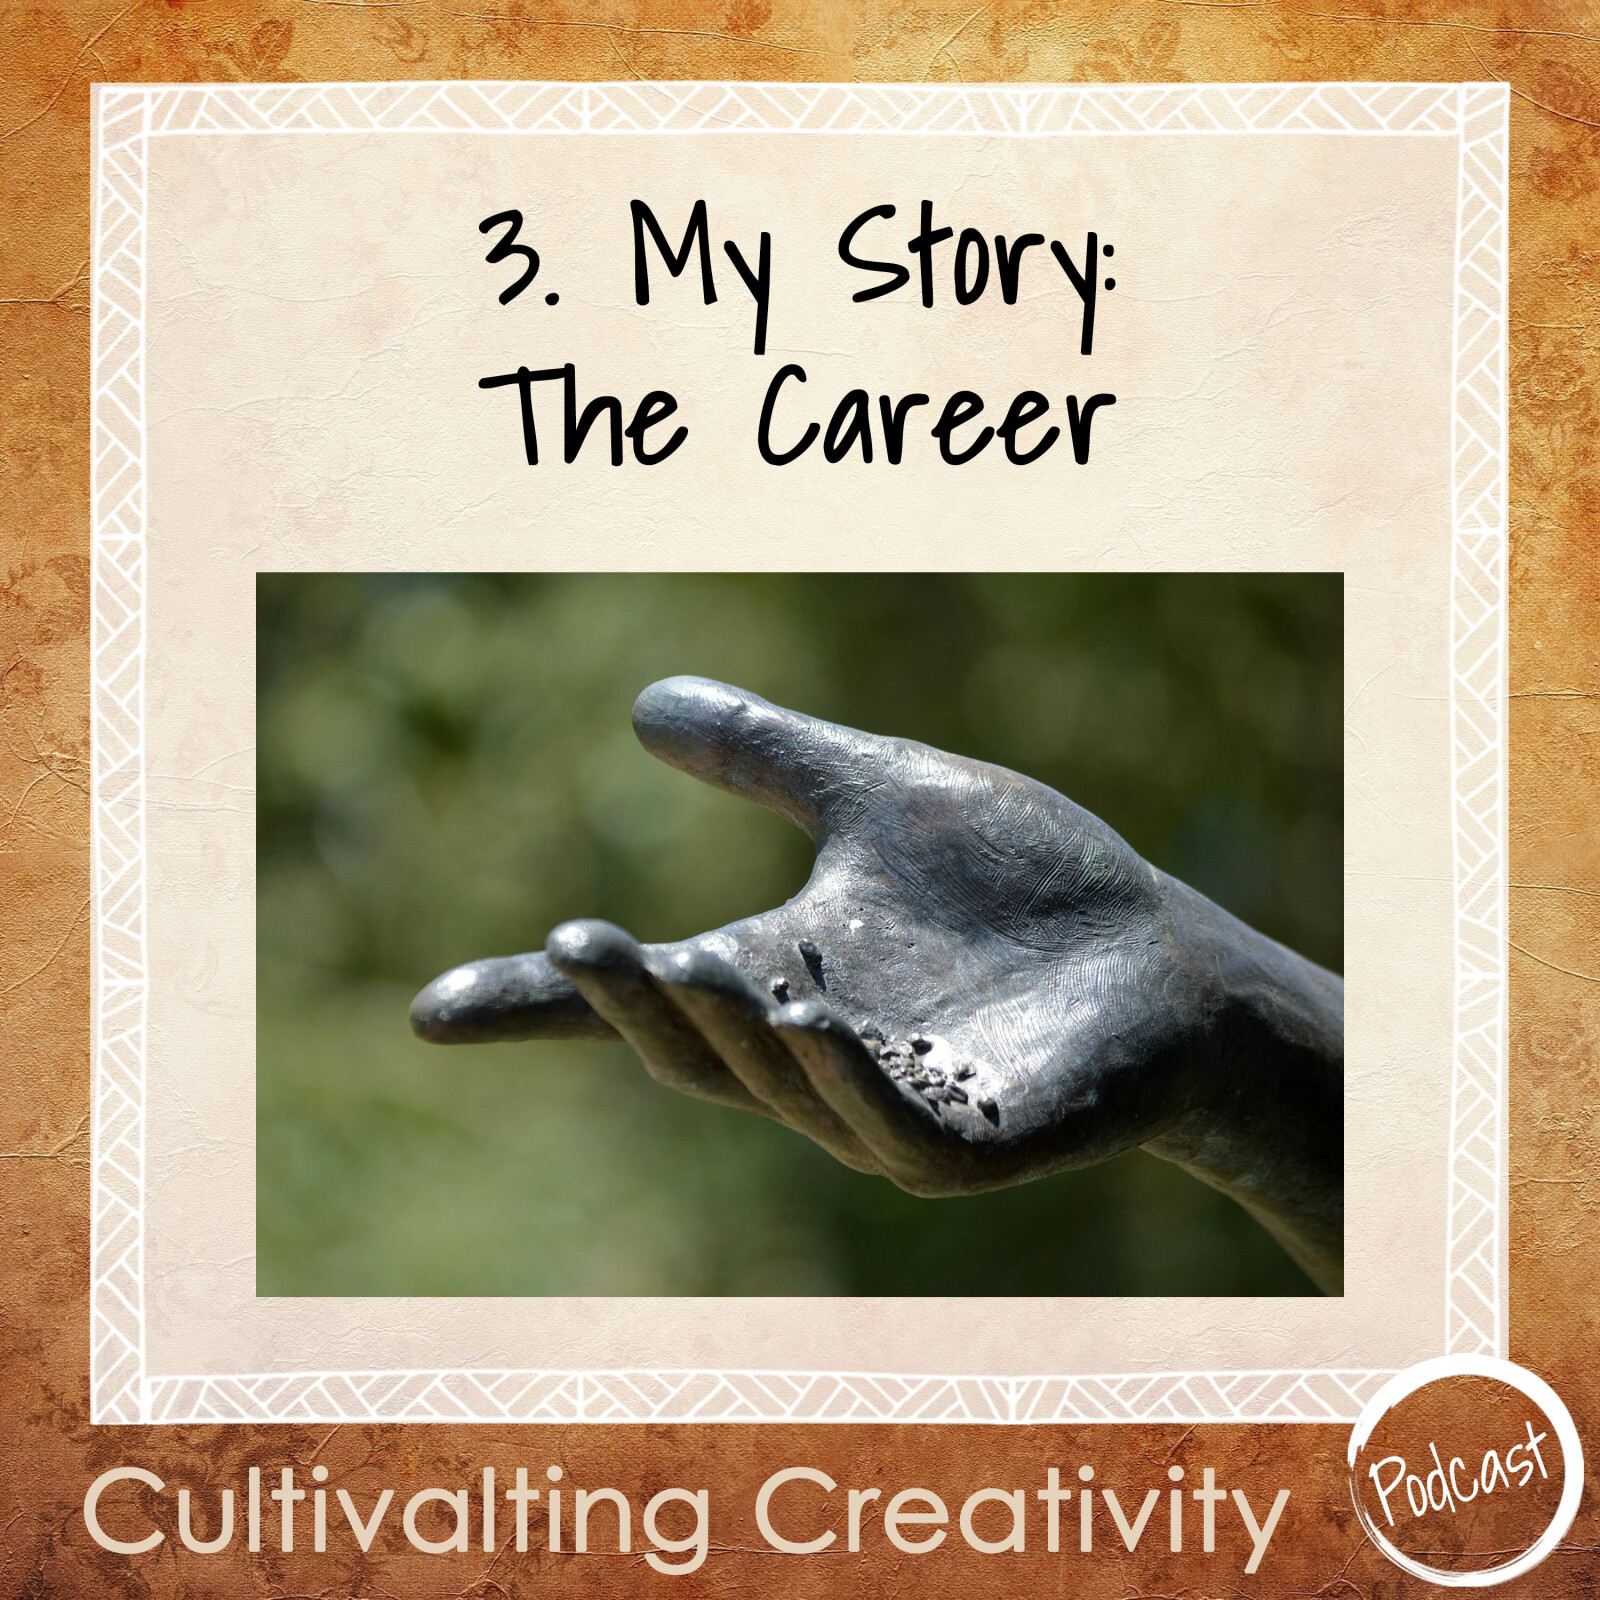 3. My Story: The Career